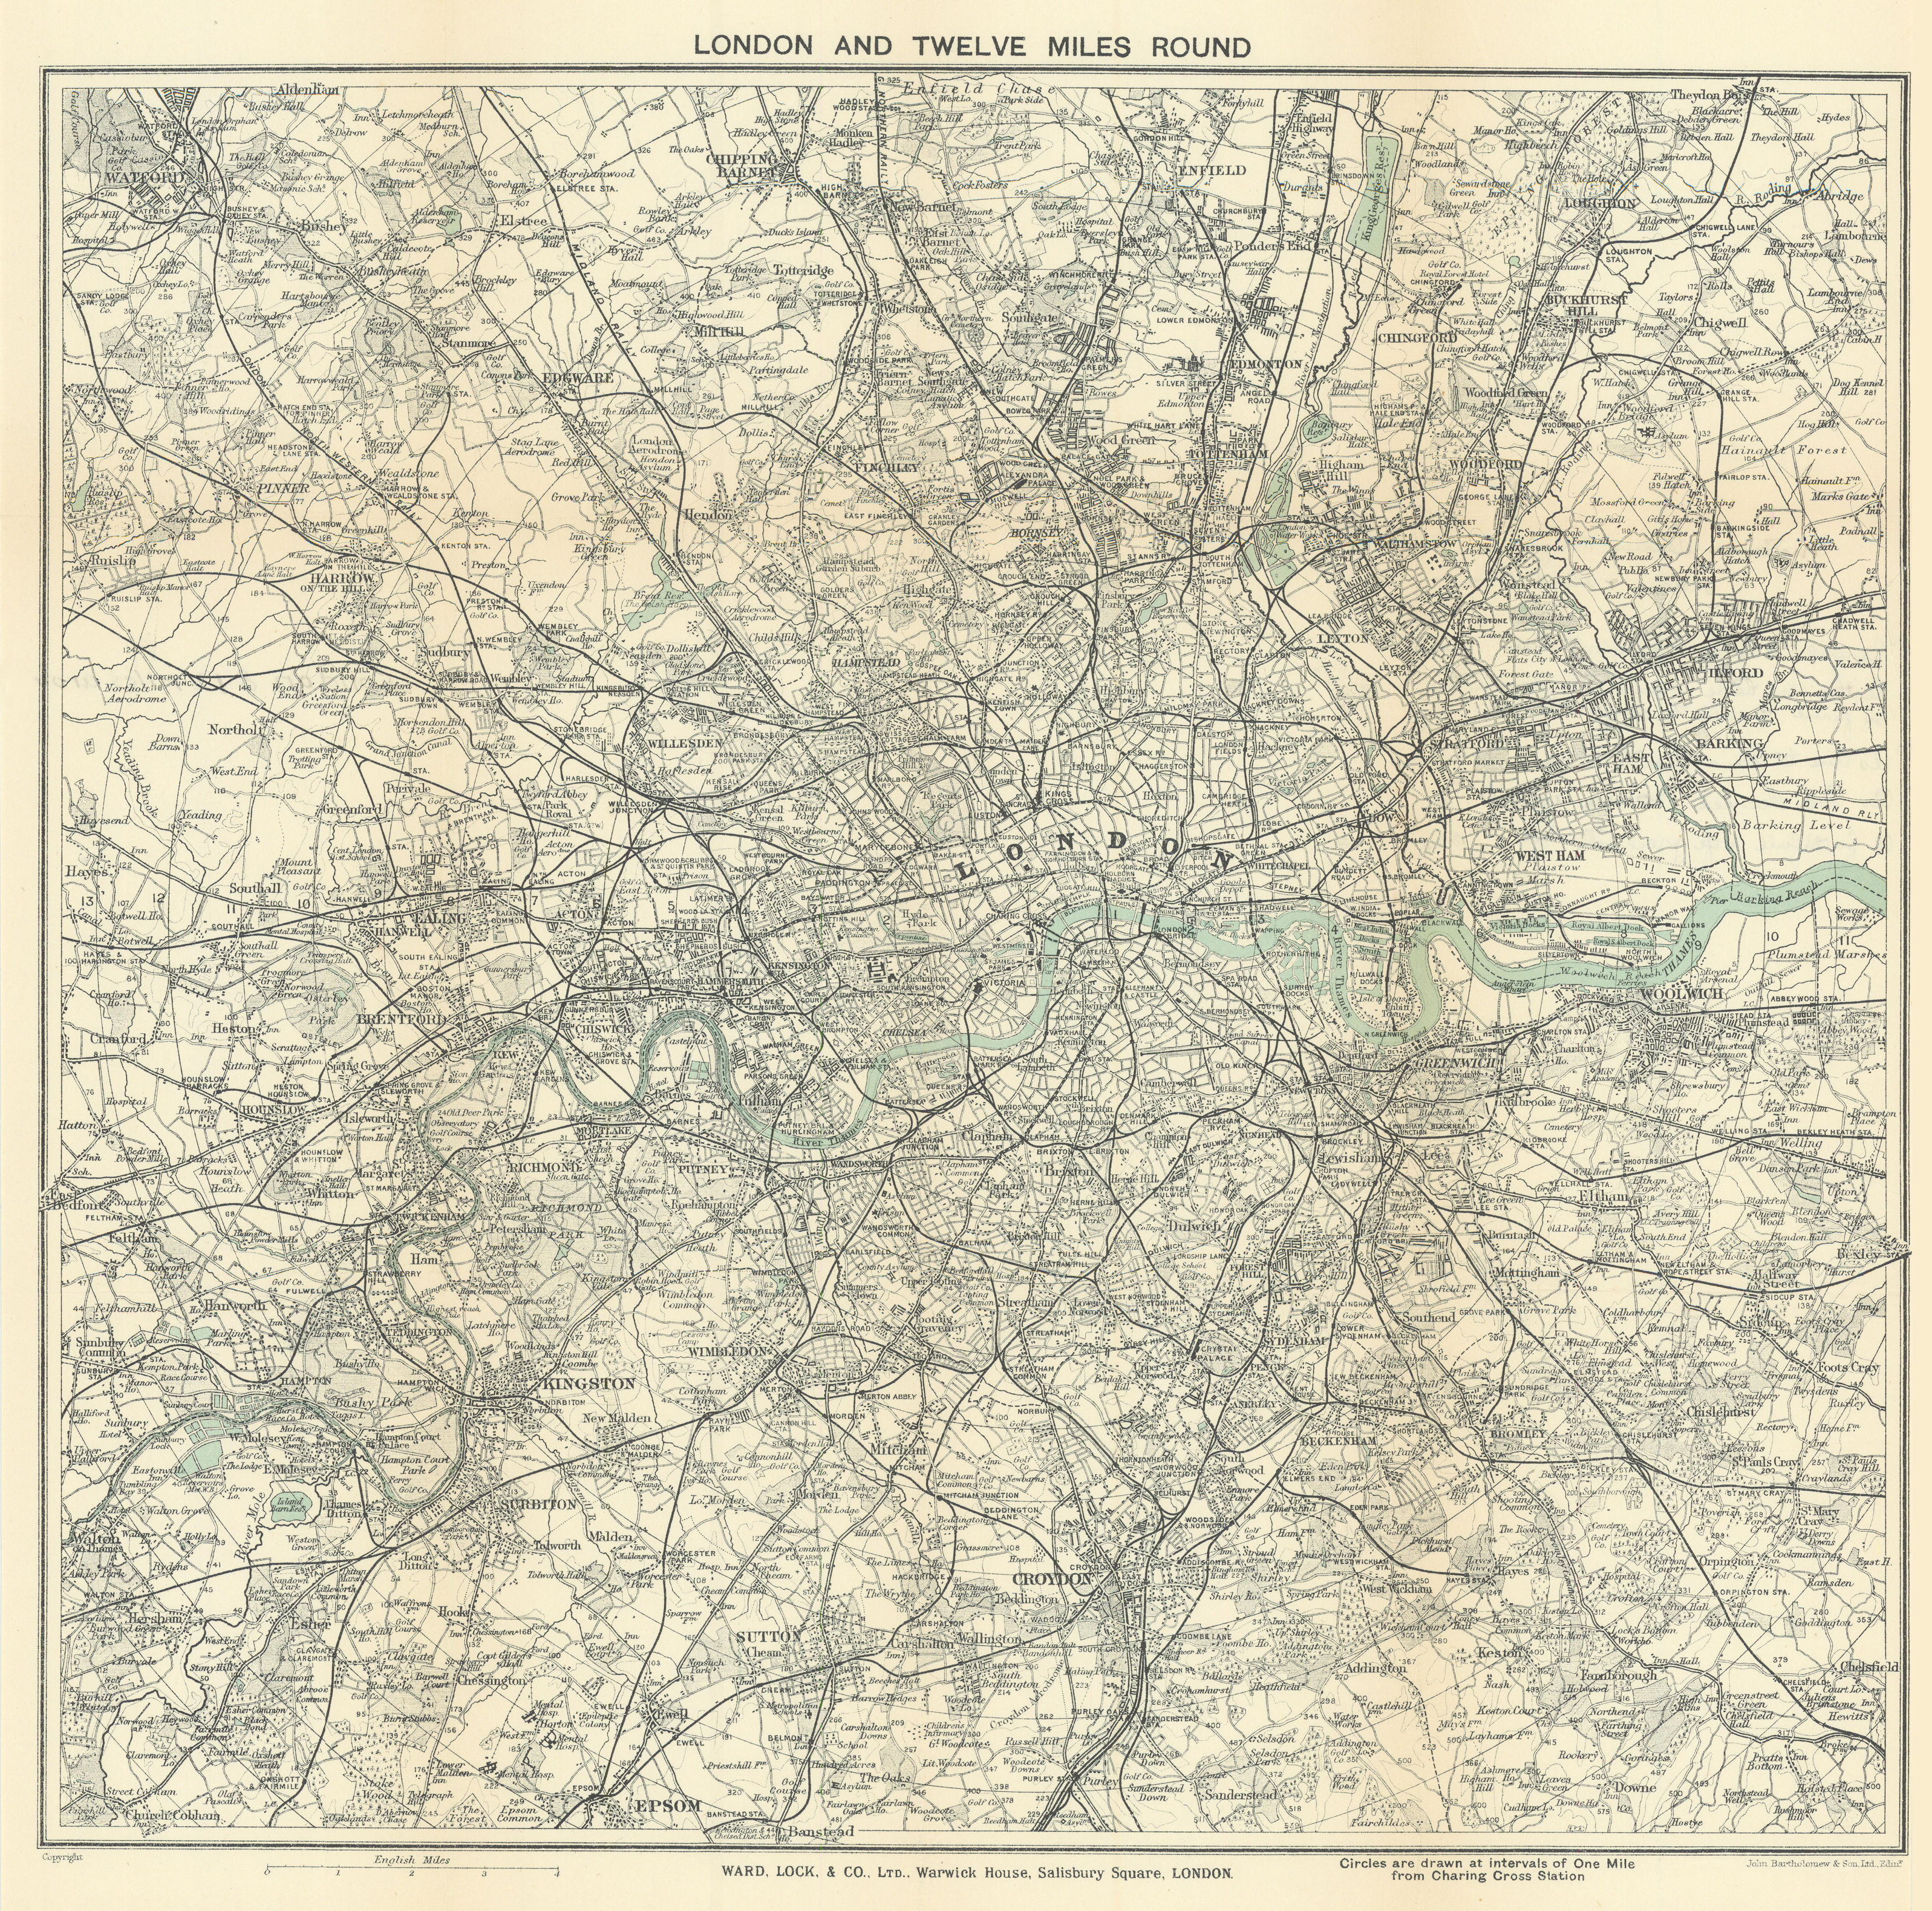 Associate Product 'LONDON AND TWELVE MILES ROUND'. Greater London. WARD LOCK 1921 old map